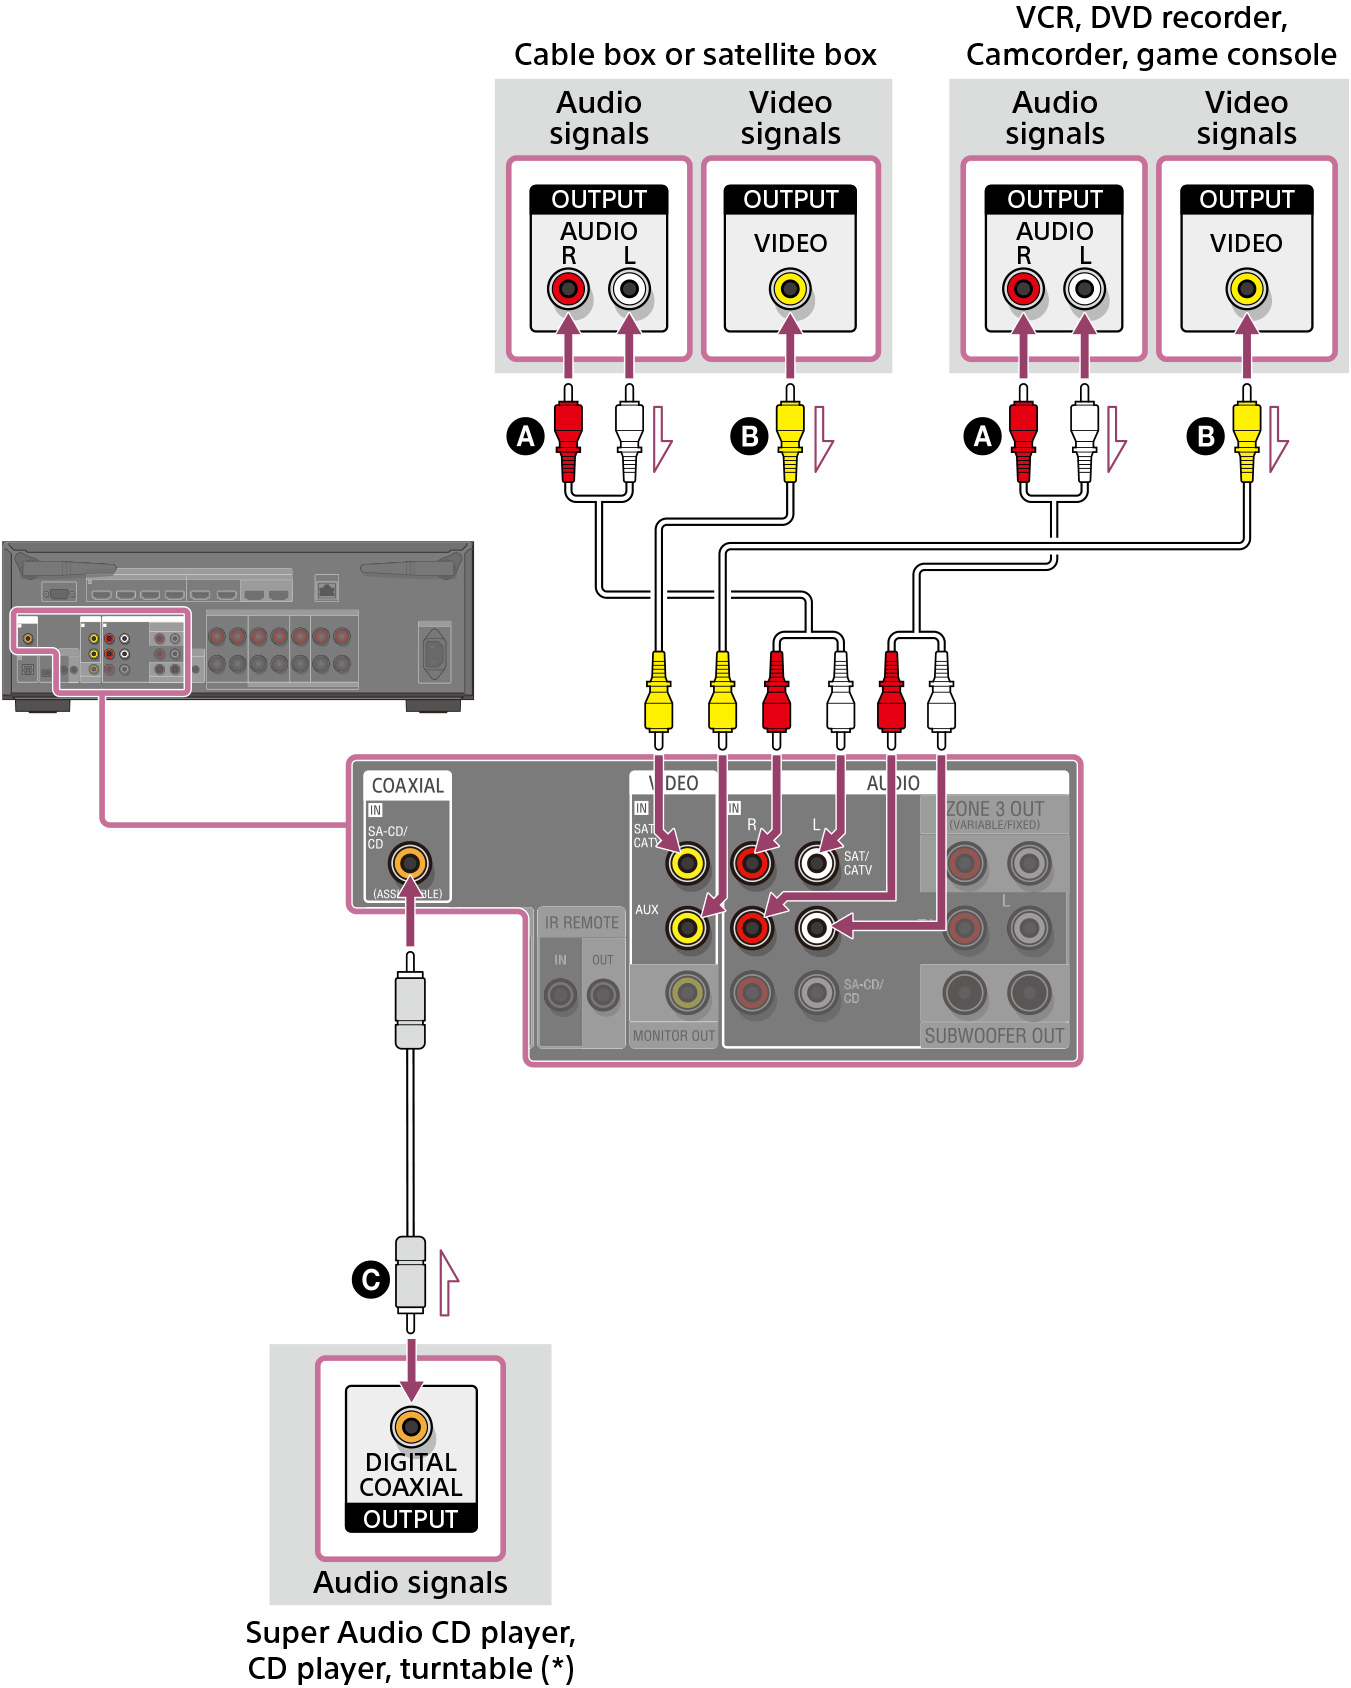 Illustration of connecting the unit and devices using the video and audio cables. The VIDEO IN and AUDIO IN jacks on the rear of the unit are labeled with input names. Use the VIDEO IN and AUDIO IN jacks marked with the same names in combination. For devices with DIGITAL COAXIAL OUTPUT jacks, we recommend using a coaxial digital cable instead of an audio cable for connection. In this case, connect the COAXIAL IN SA-CD/CD jack on the rear of the unit with the DIGITAL COAXIAL OUTPUT jack on the device using a coaxial digital cable (not supplied).